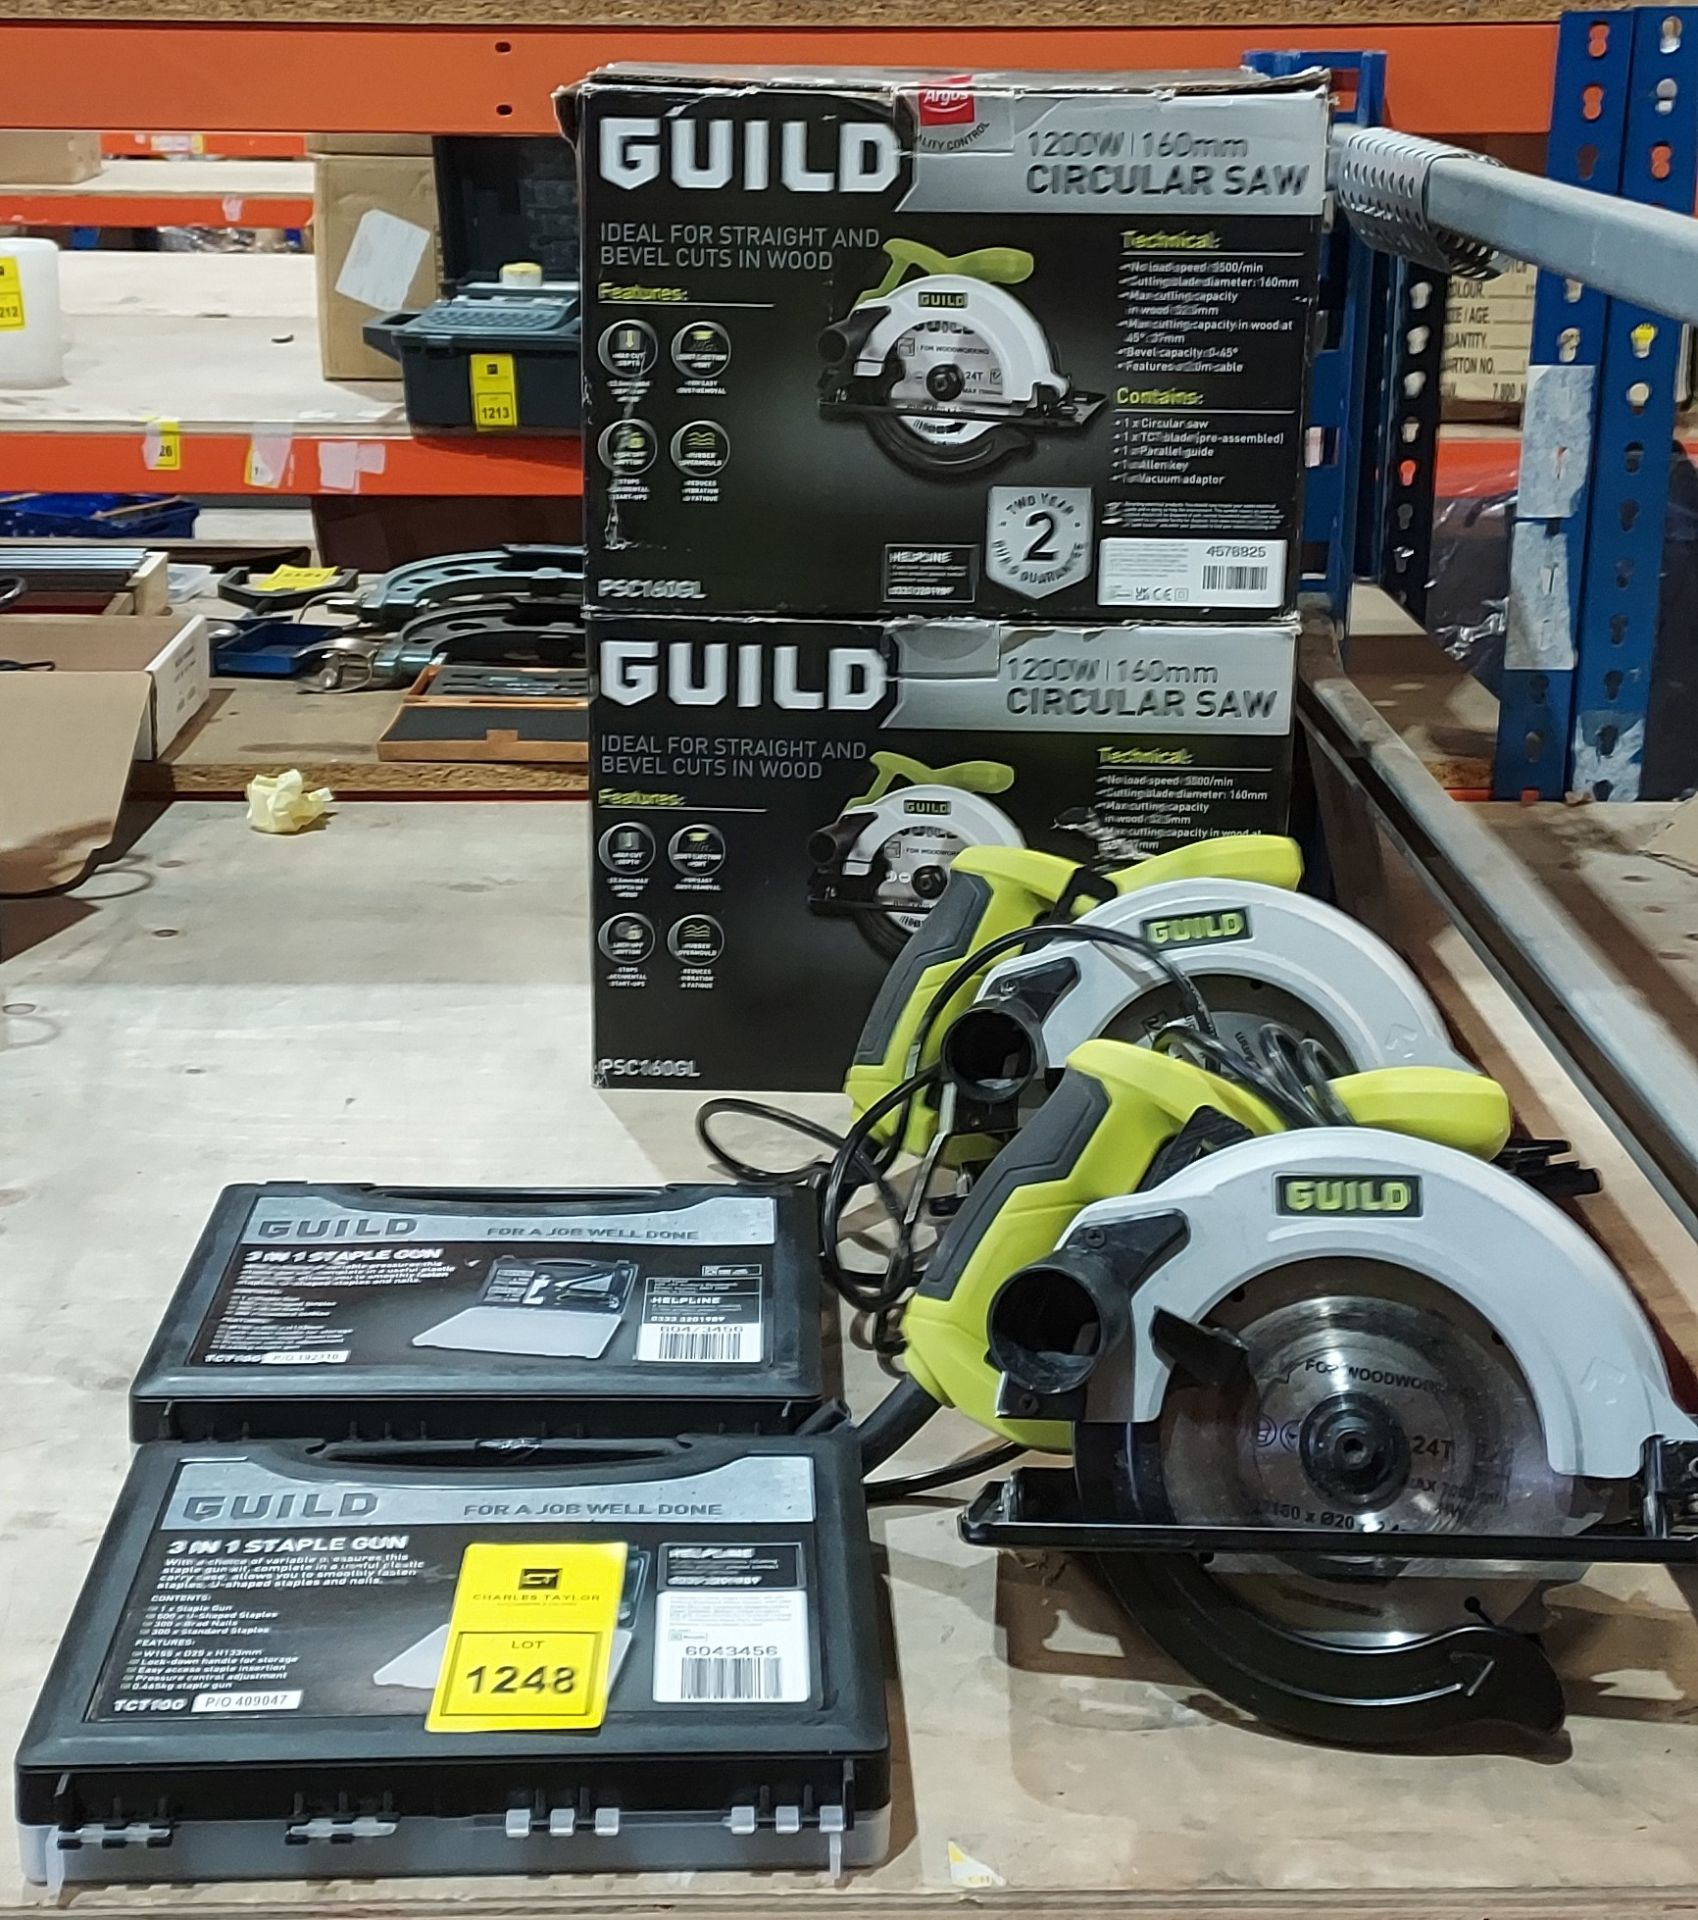 4 PIECE TOOL LOT TO INCLUDE 2 X GUILD 1200 W CIRCULAR SAWS -160MM BLADE (PSC160GL) AND 2 X GUILD 3